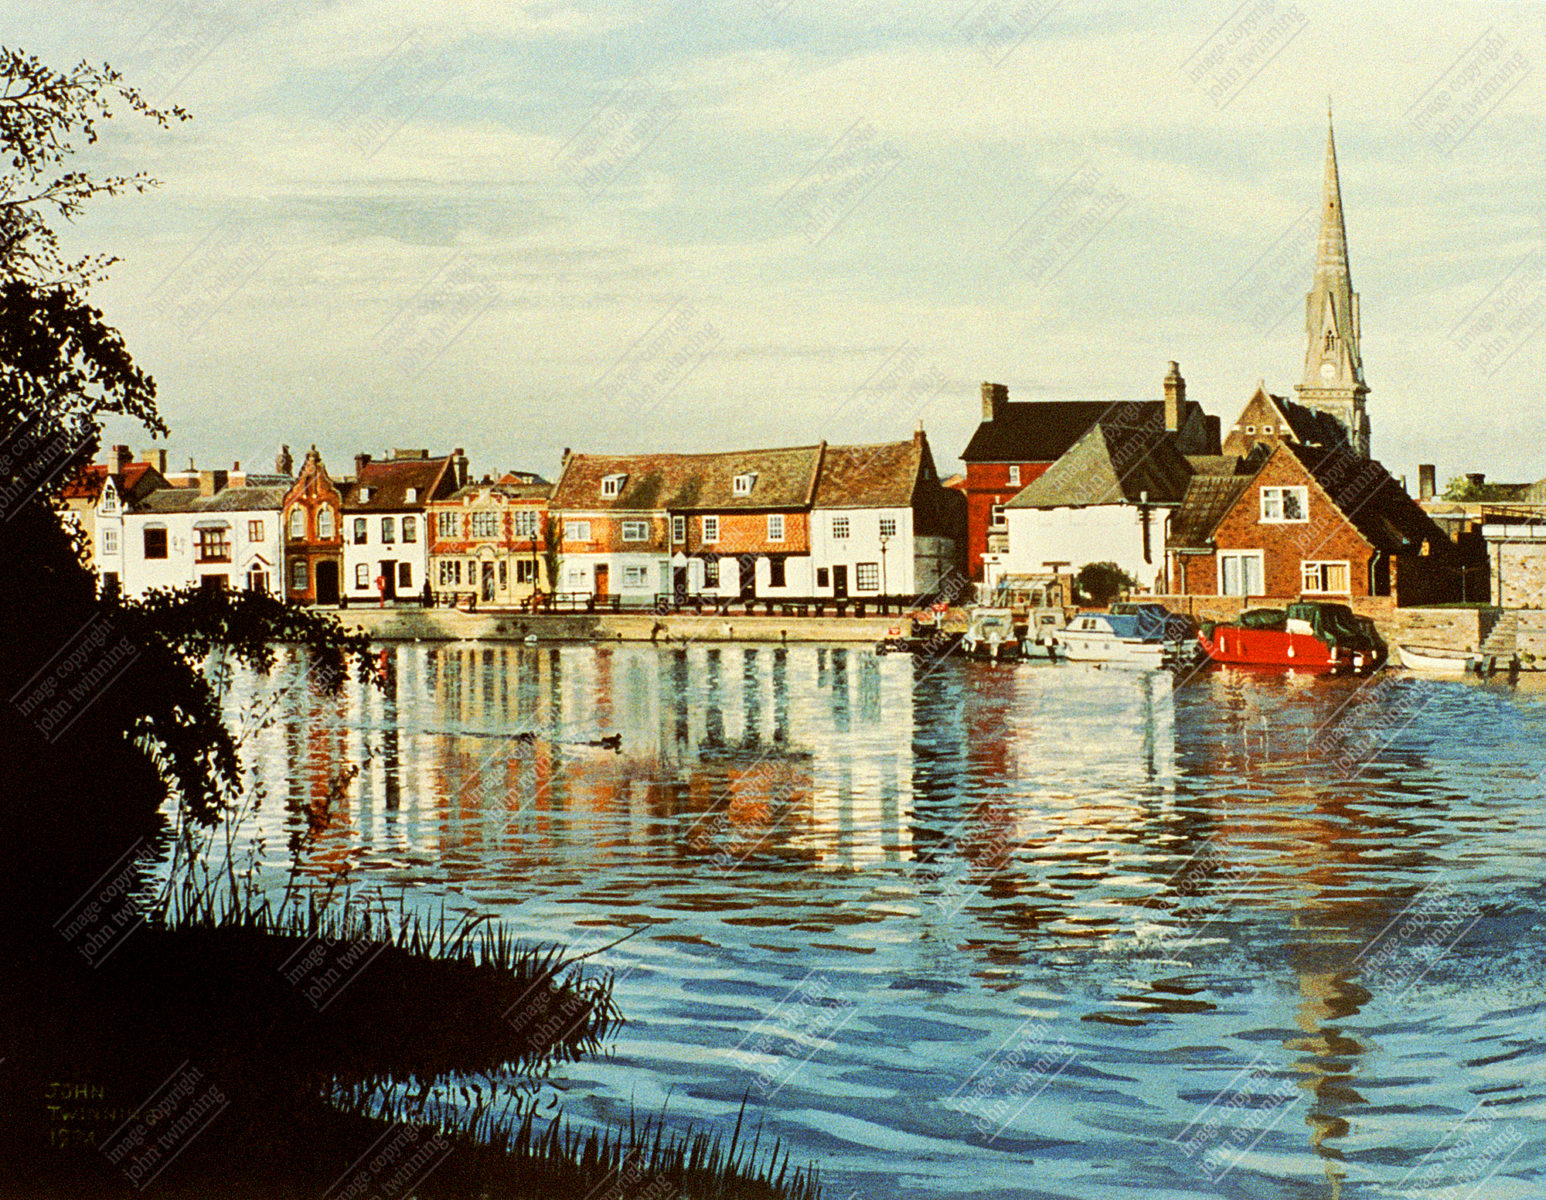 'The Quay, Summer Afternoon, St. Ives' - art print from a painting of the Cambridgeshire town's beautifully reflected quay